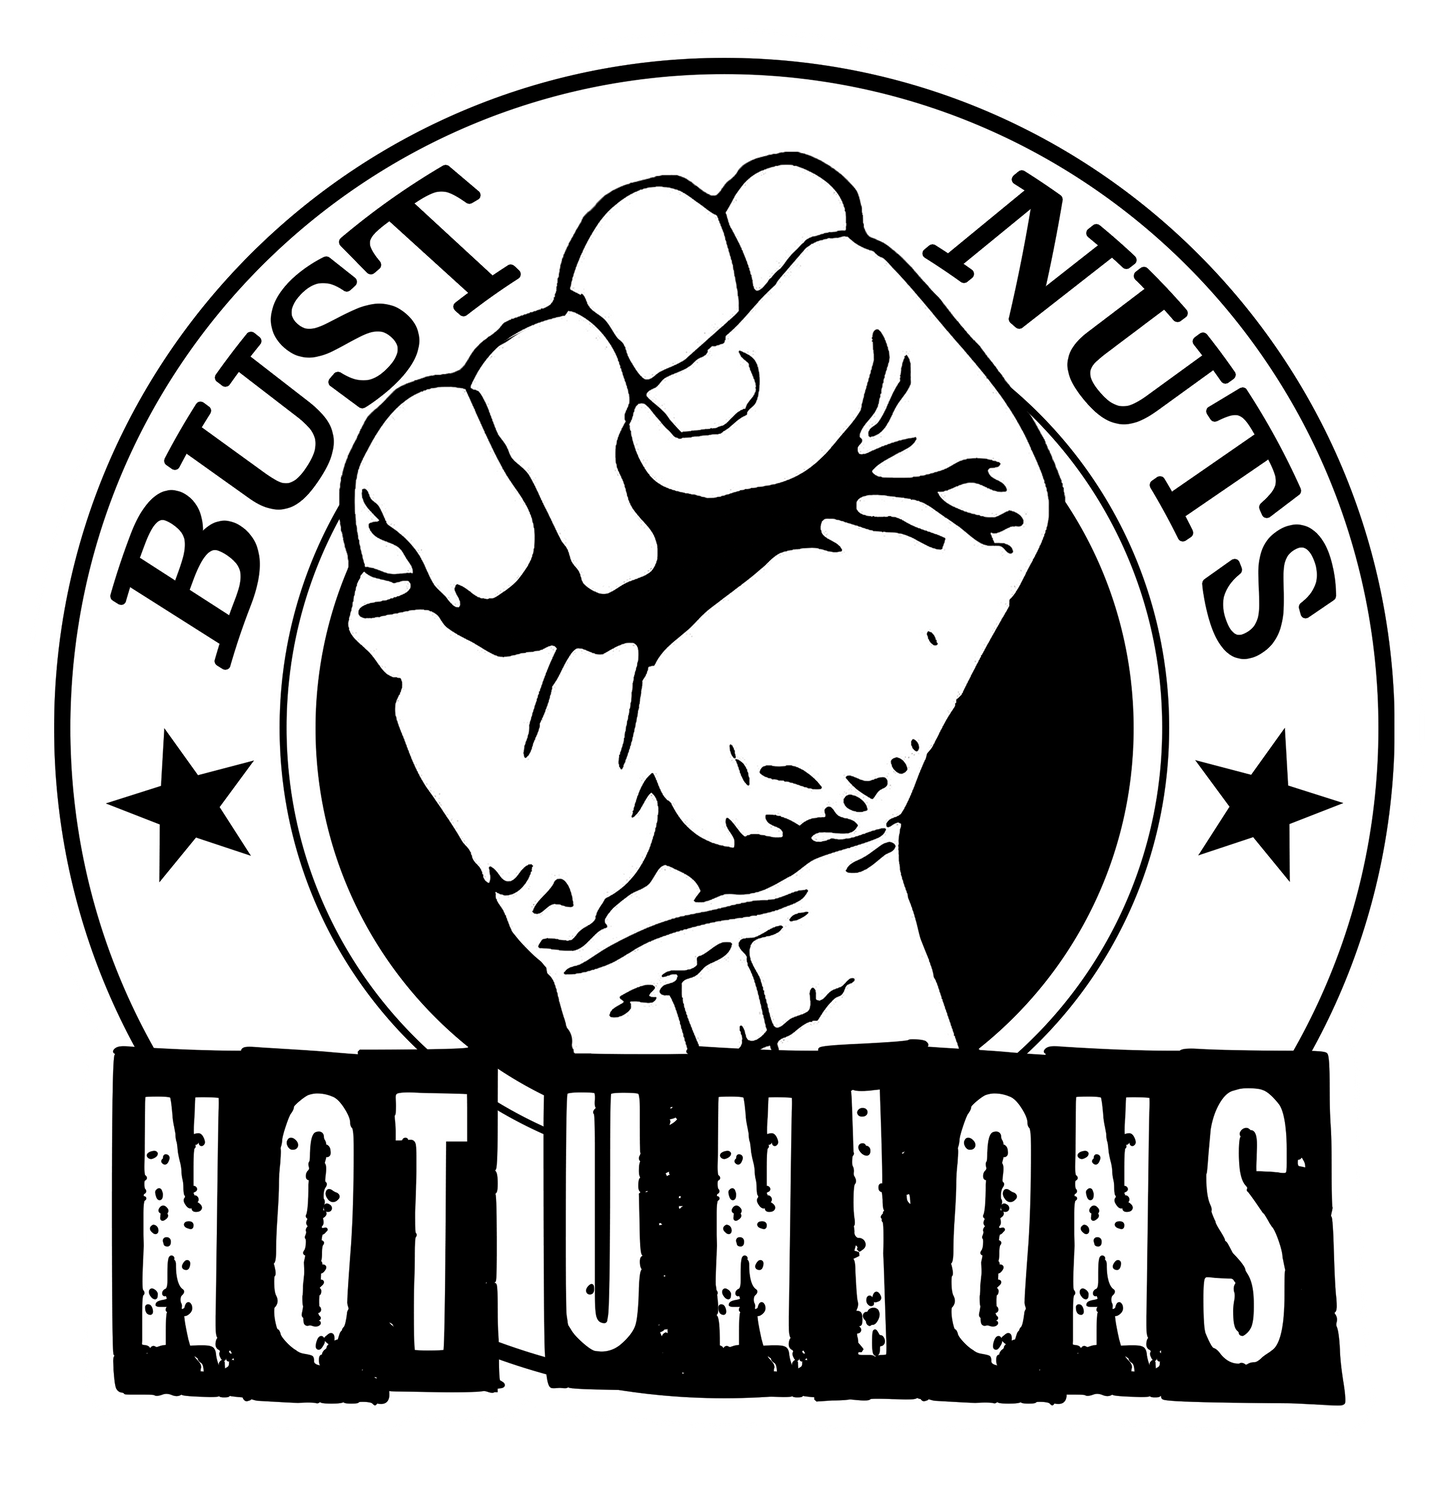 Bust Nuts Not Unions